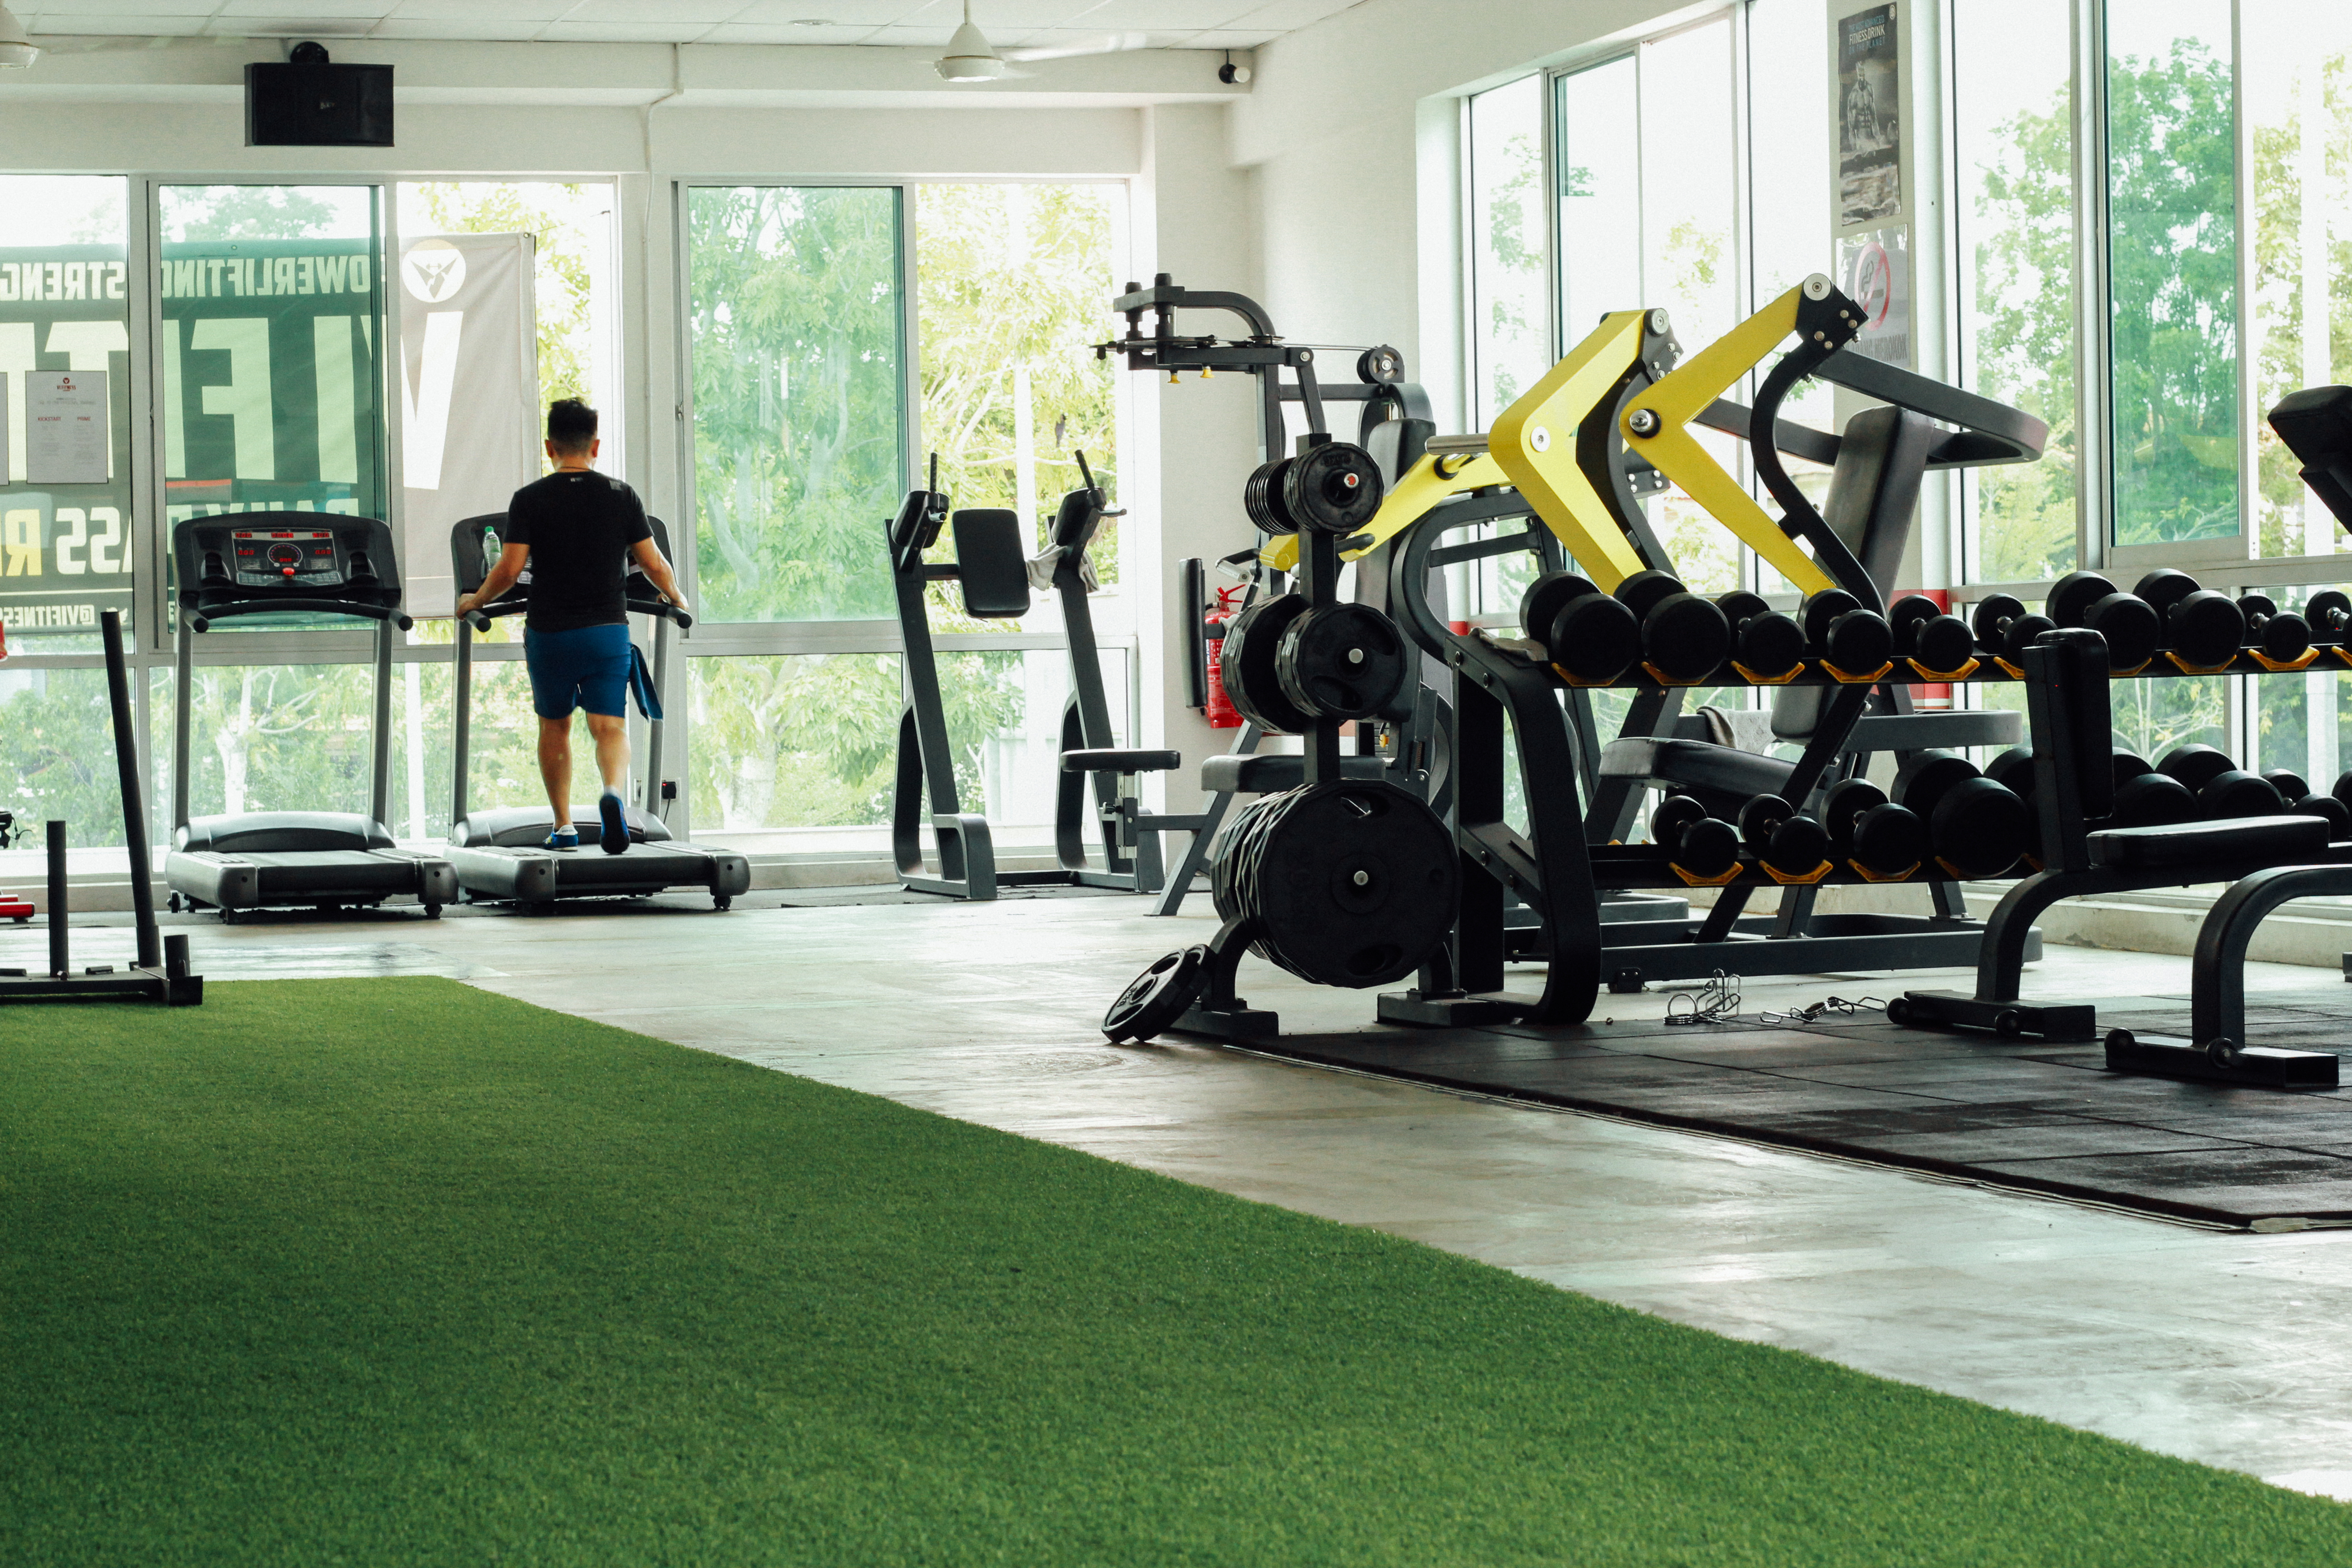 Sled, dumbbells and cardio area - VI FITNESS S2